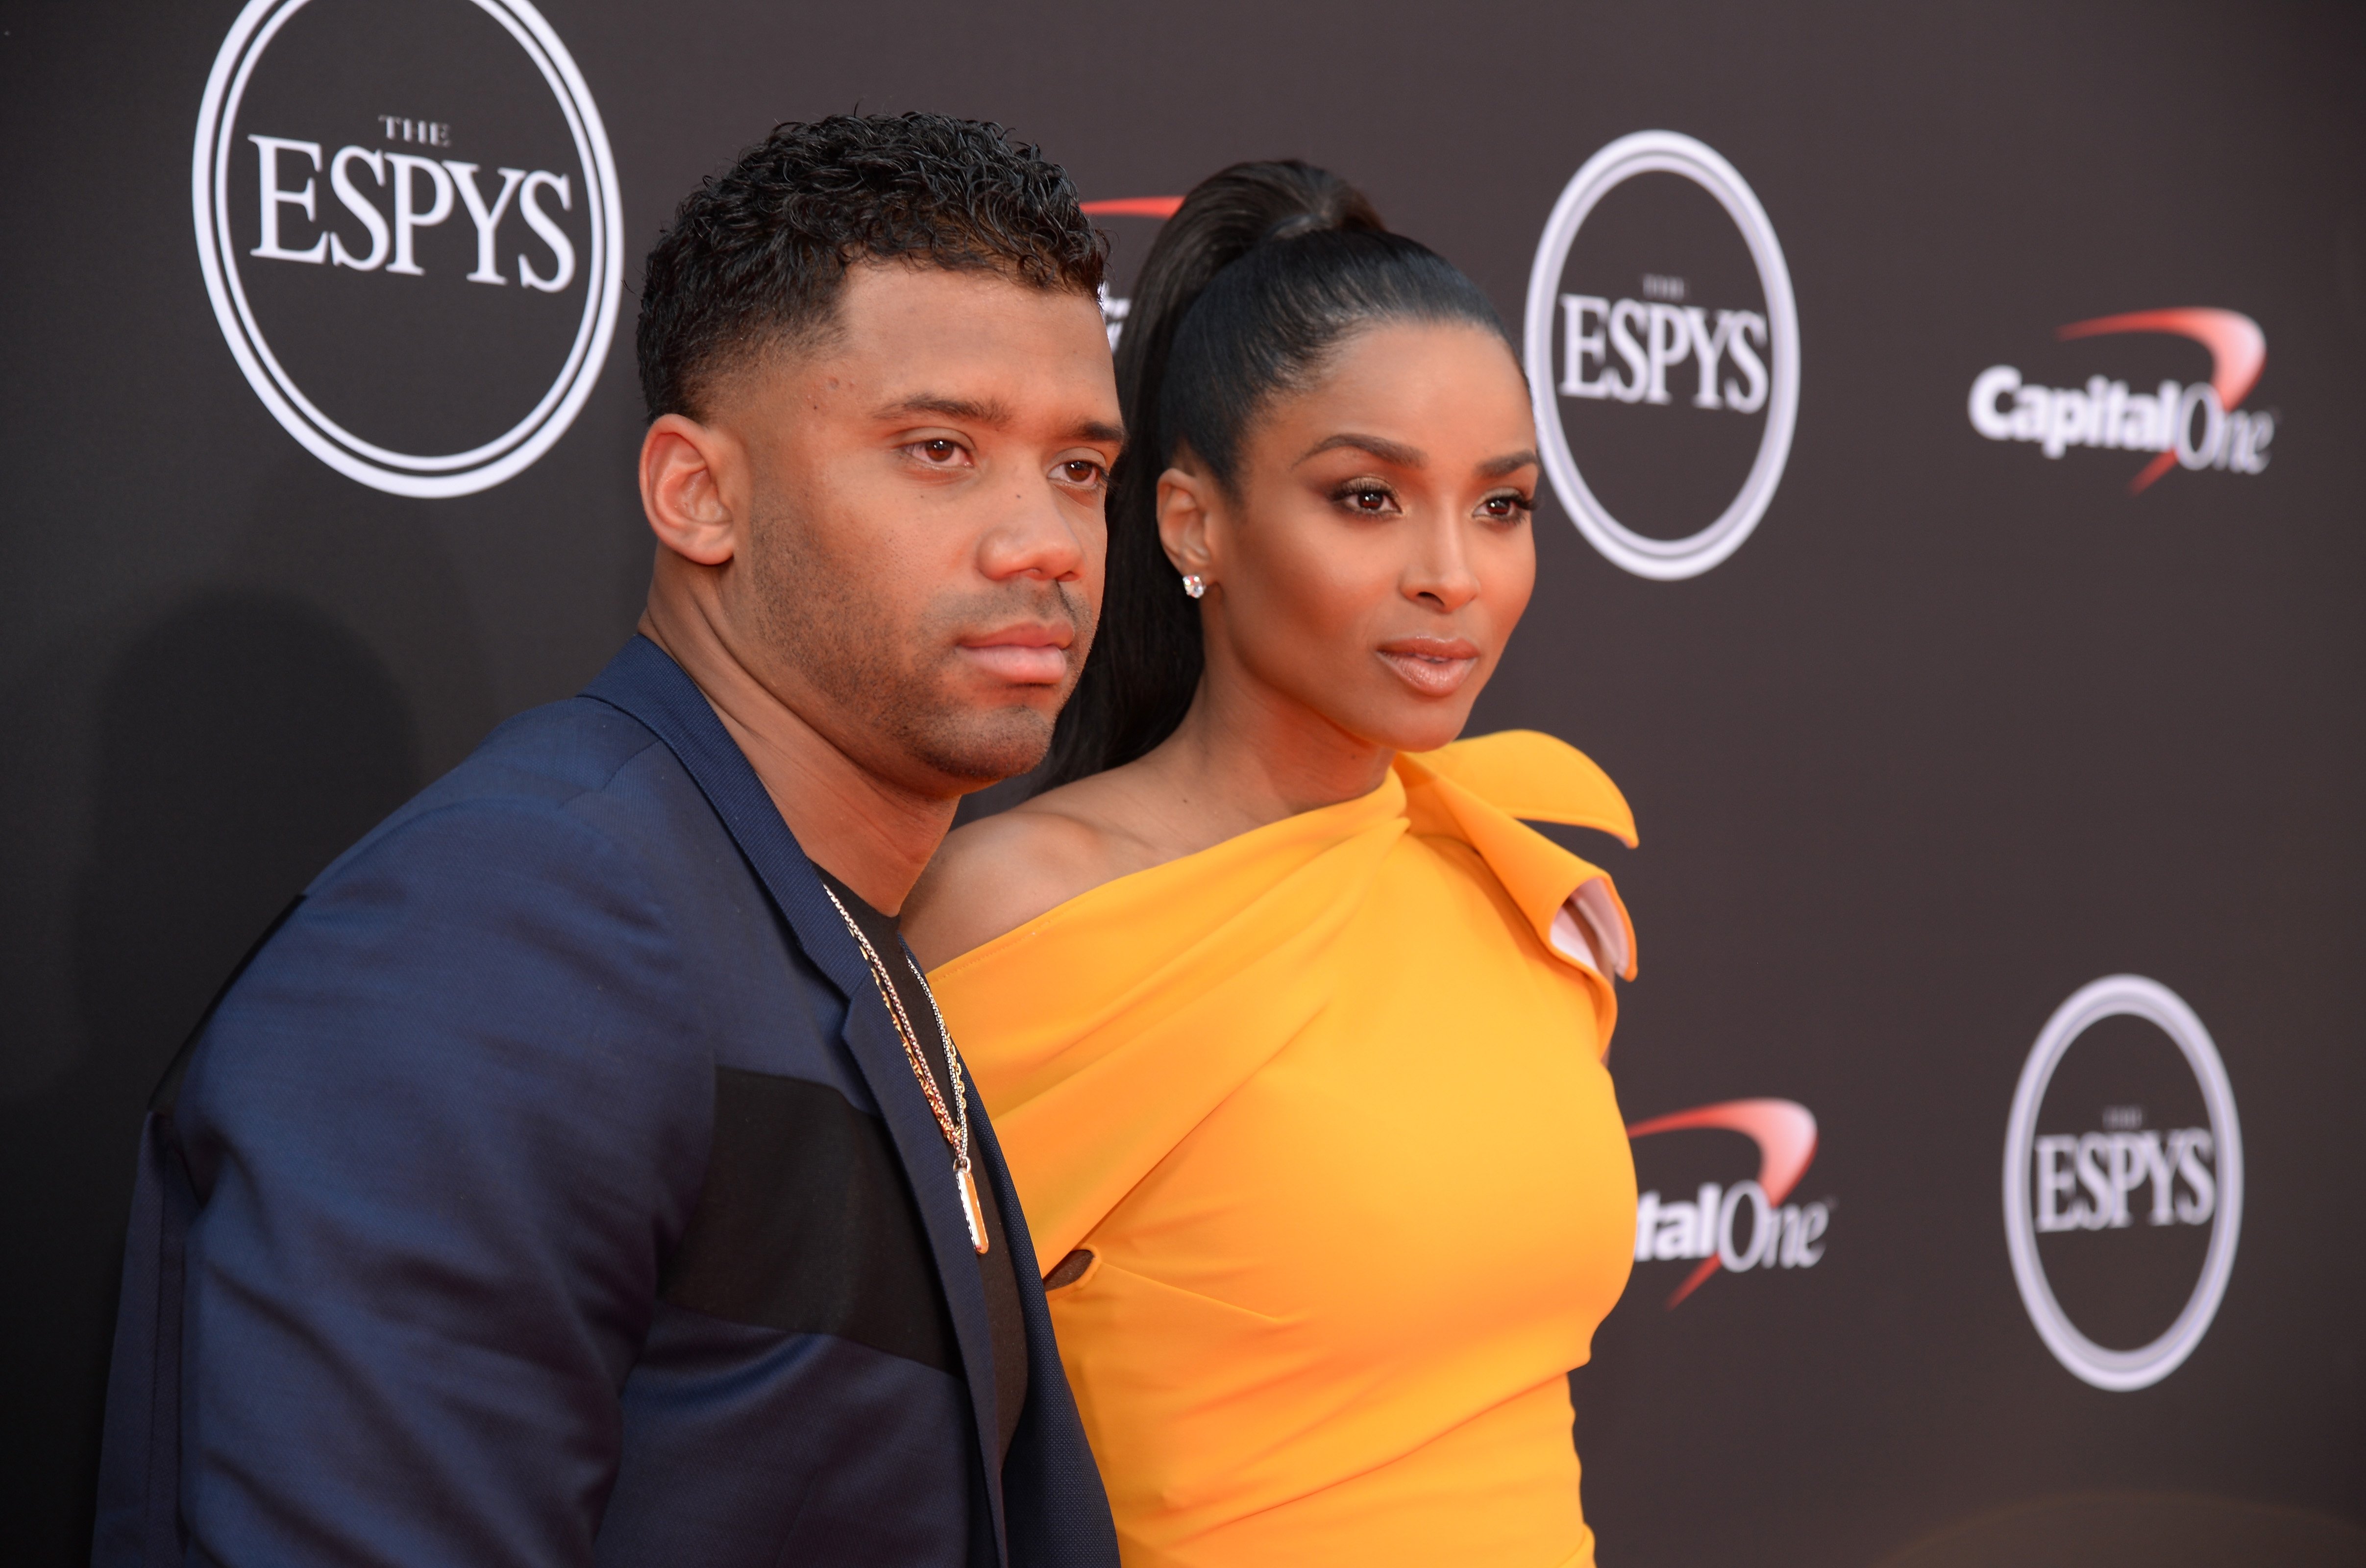 Ciara and Russell Wilson at the ESPY Awards Red Carpet Show at Microsoft Theater on July 18, 2018. | Photo: Getty Images